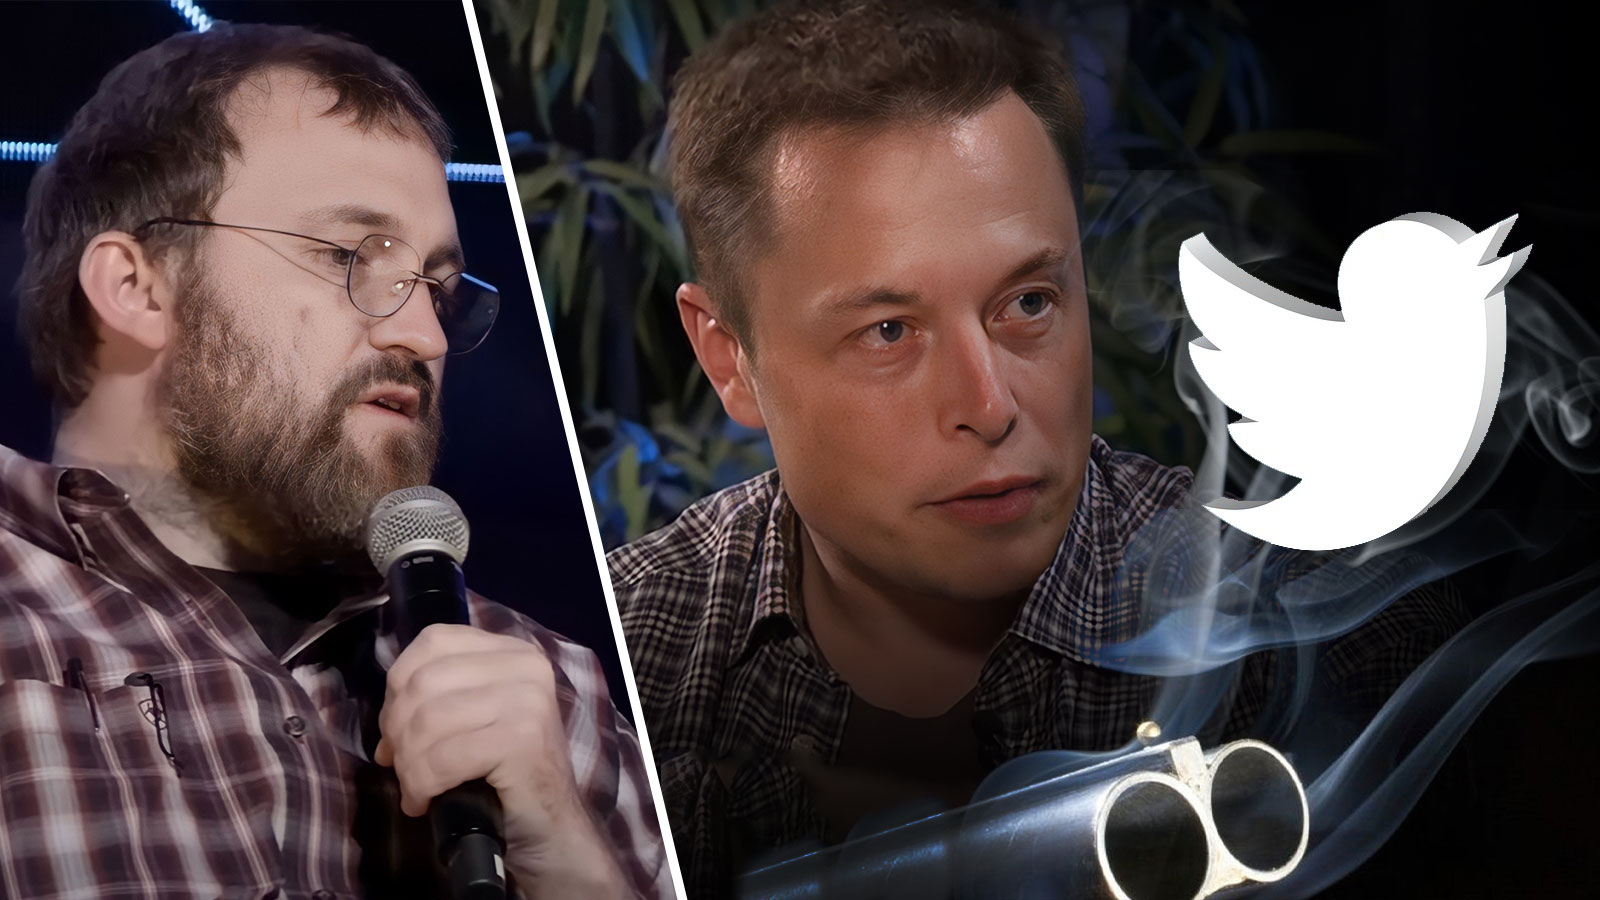 Cardano’s Charles Hoskinson Puzzled By Elon Musk’s Twitter Deal, Says “Shotgun Wedding” Coming